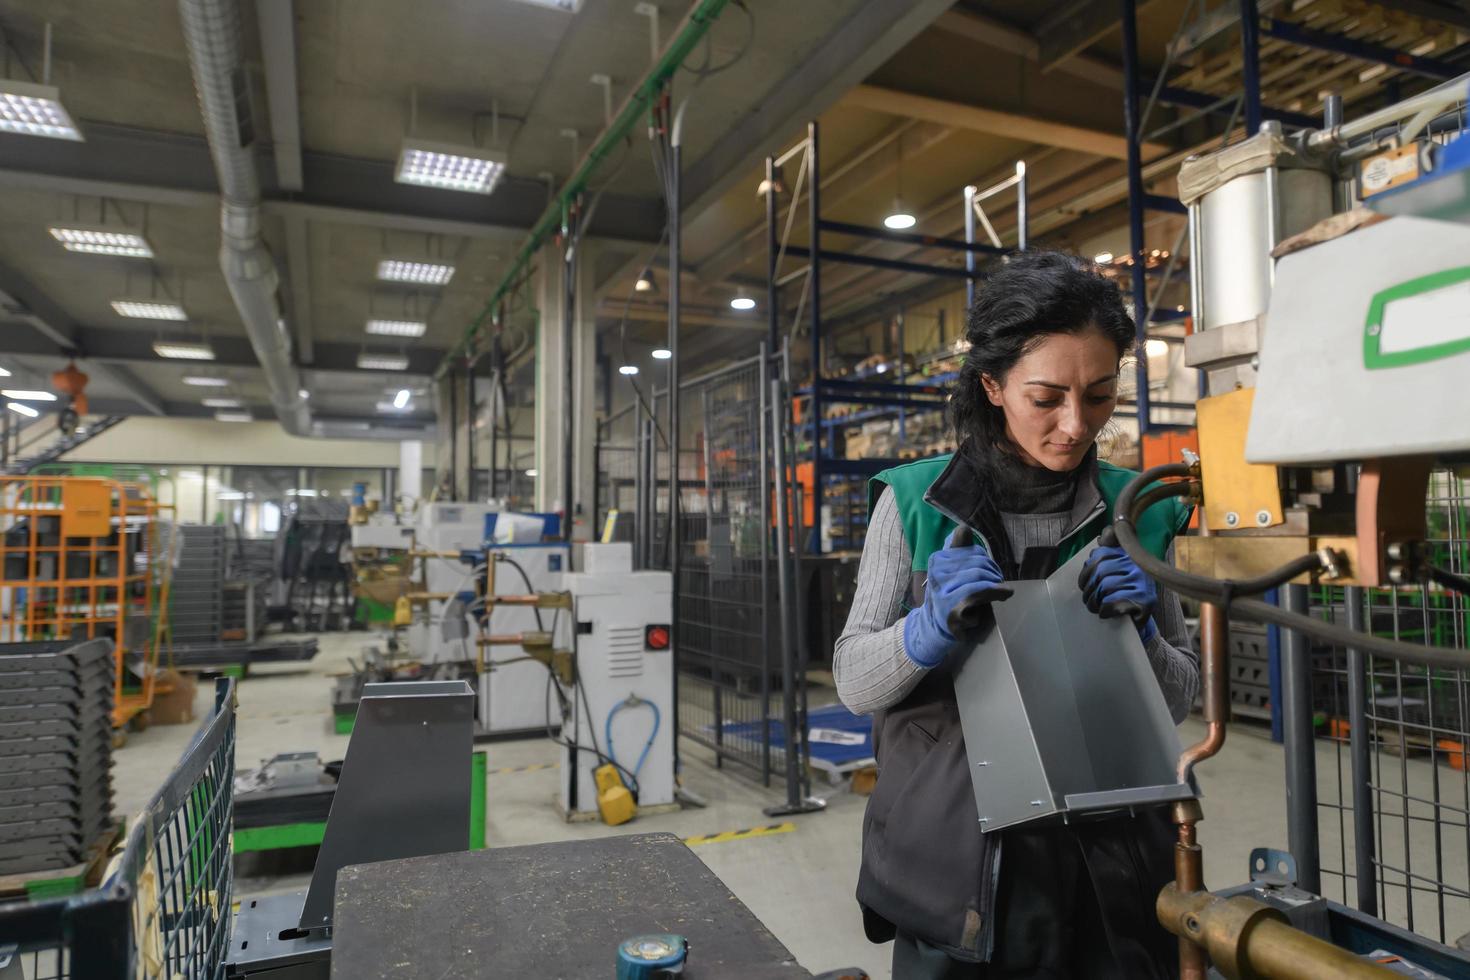 Turkey, 2022 - a woman working in a modern metal factory assembles parts for a new machine photo